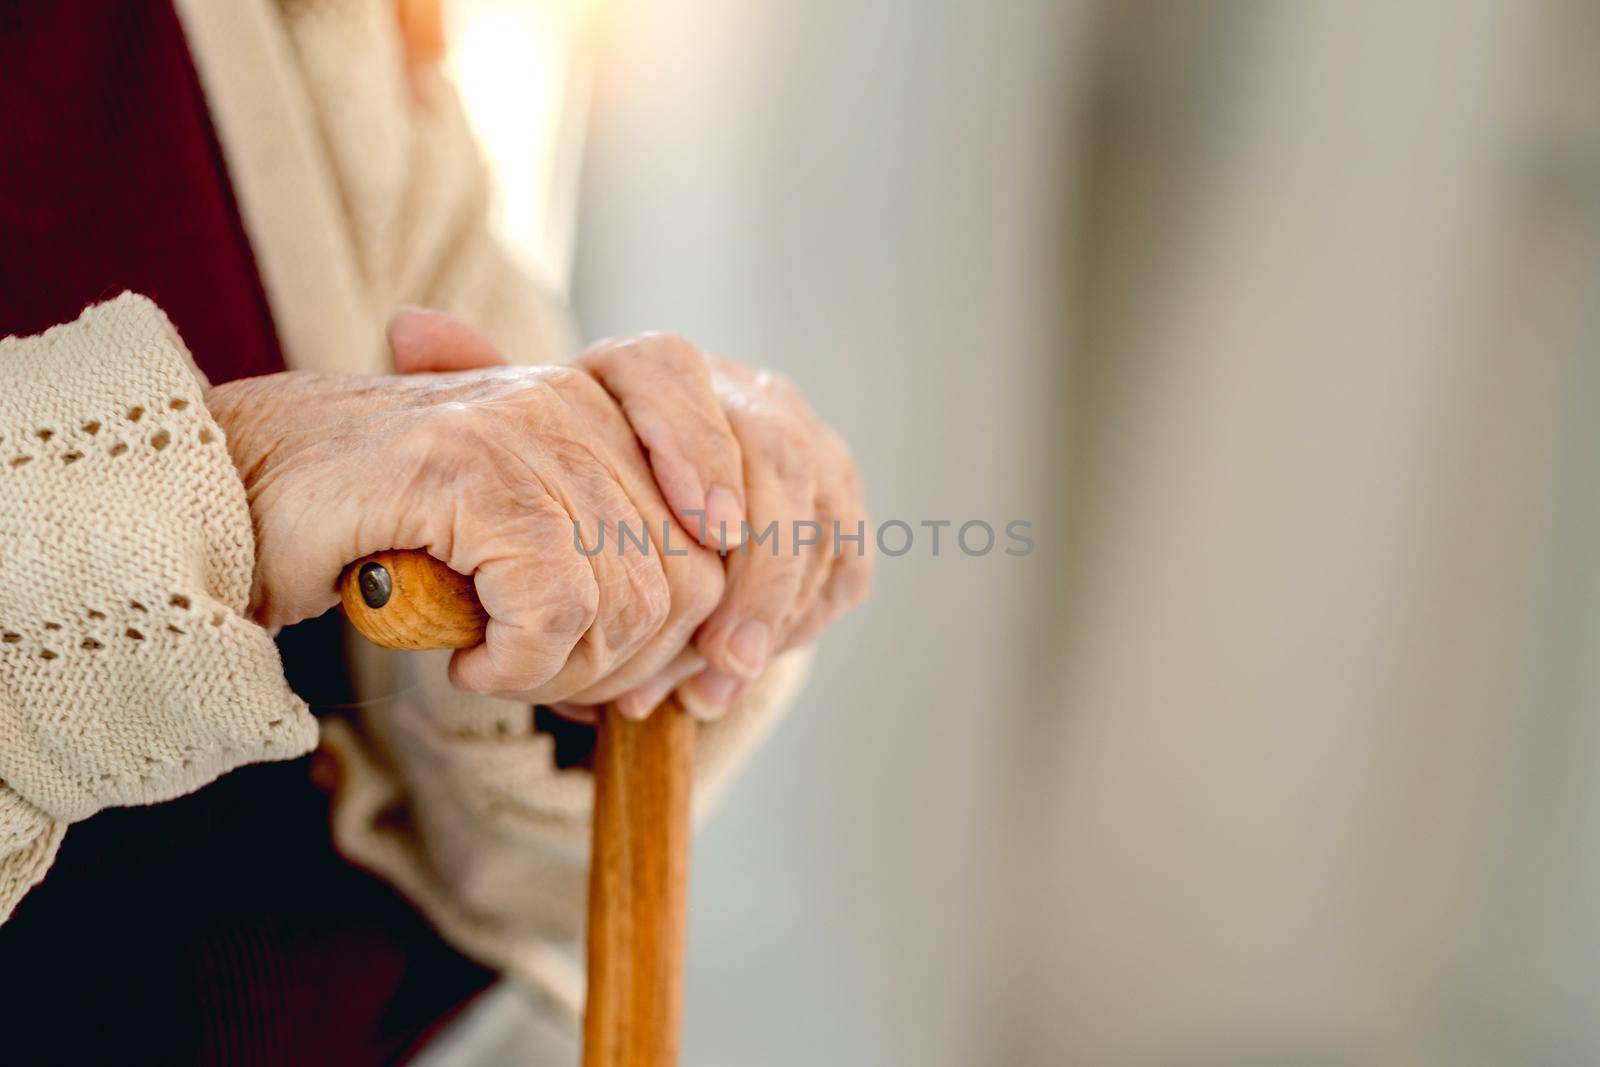 Wooden cane in hand of old woman sitting in light room